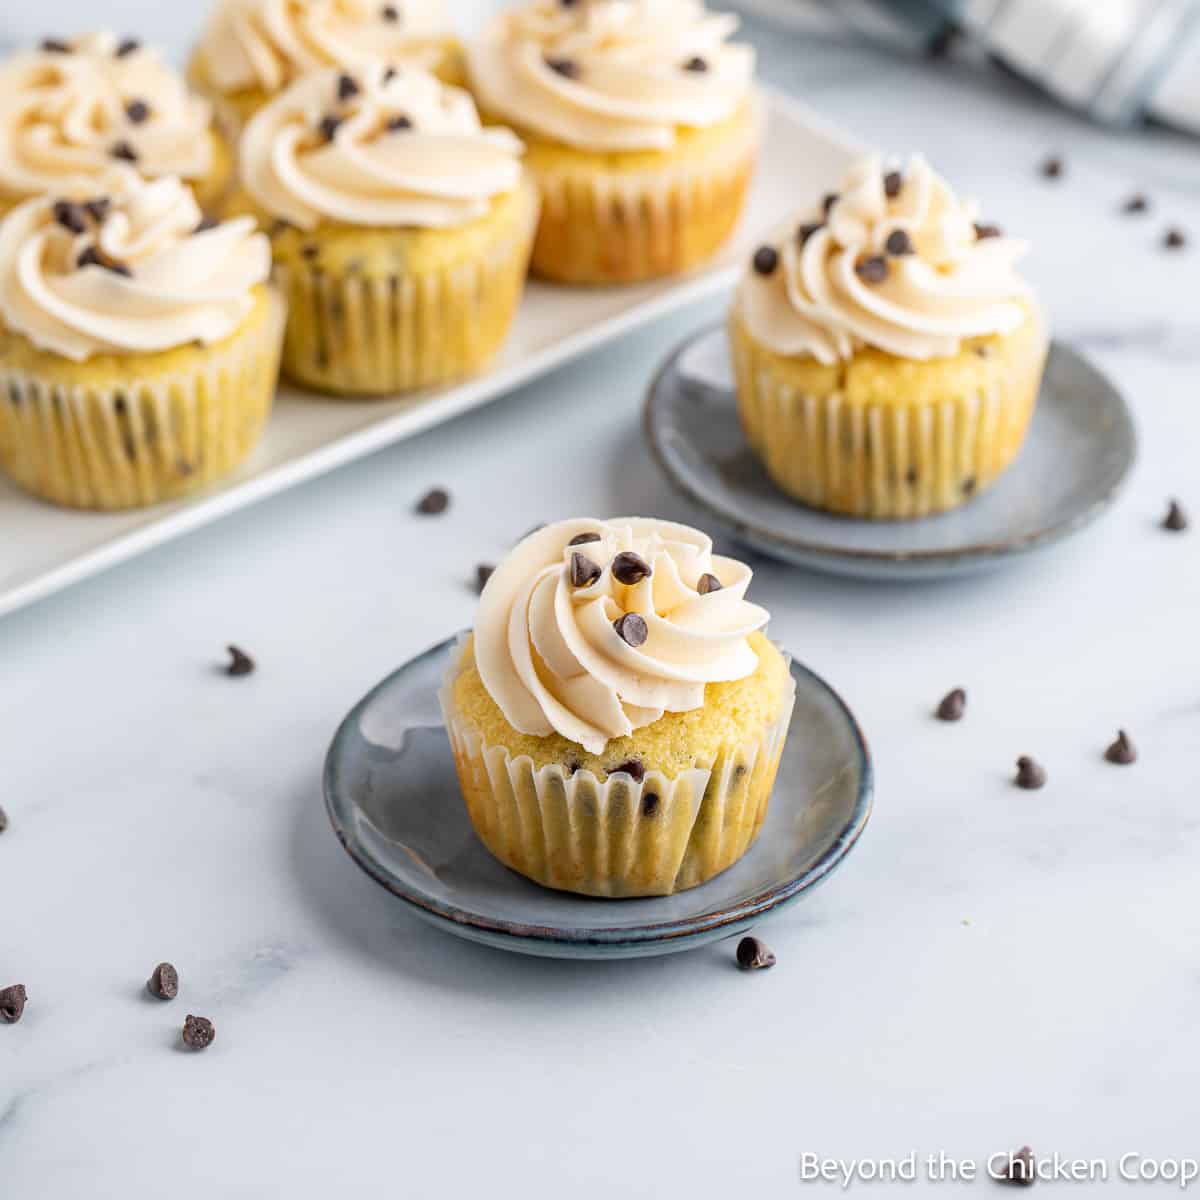 Cupcakes topped with mini chocolate chips on small blue plates.